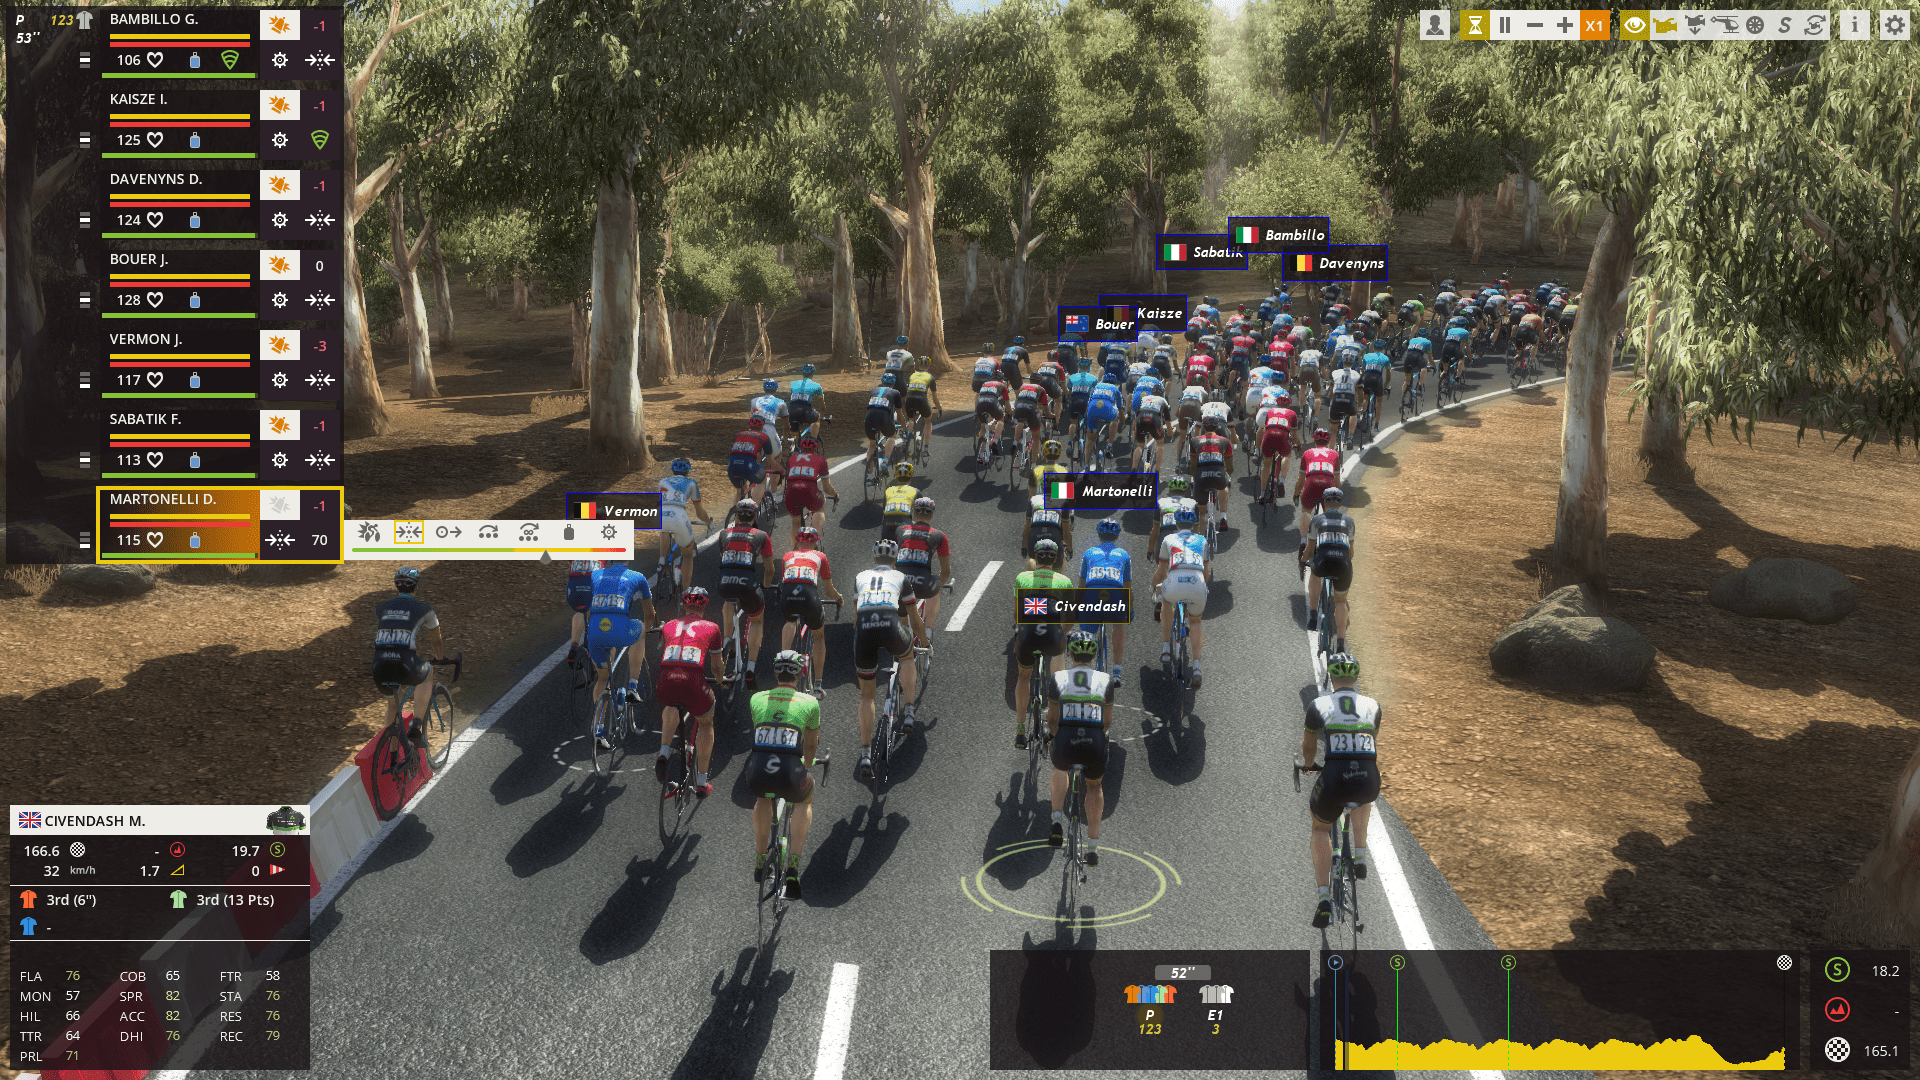 Tour De France video games - A new update for Pro Cycling Manager